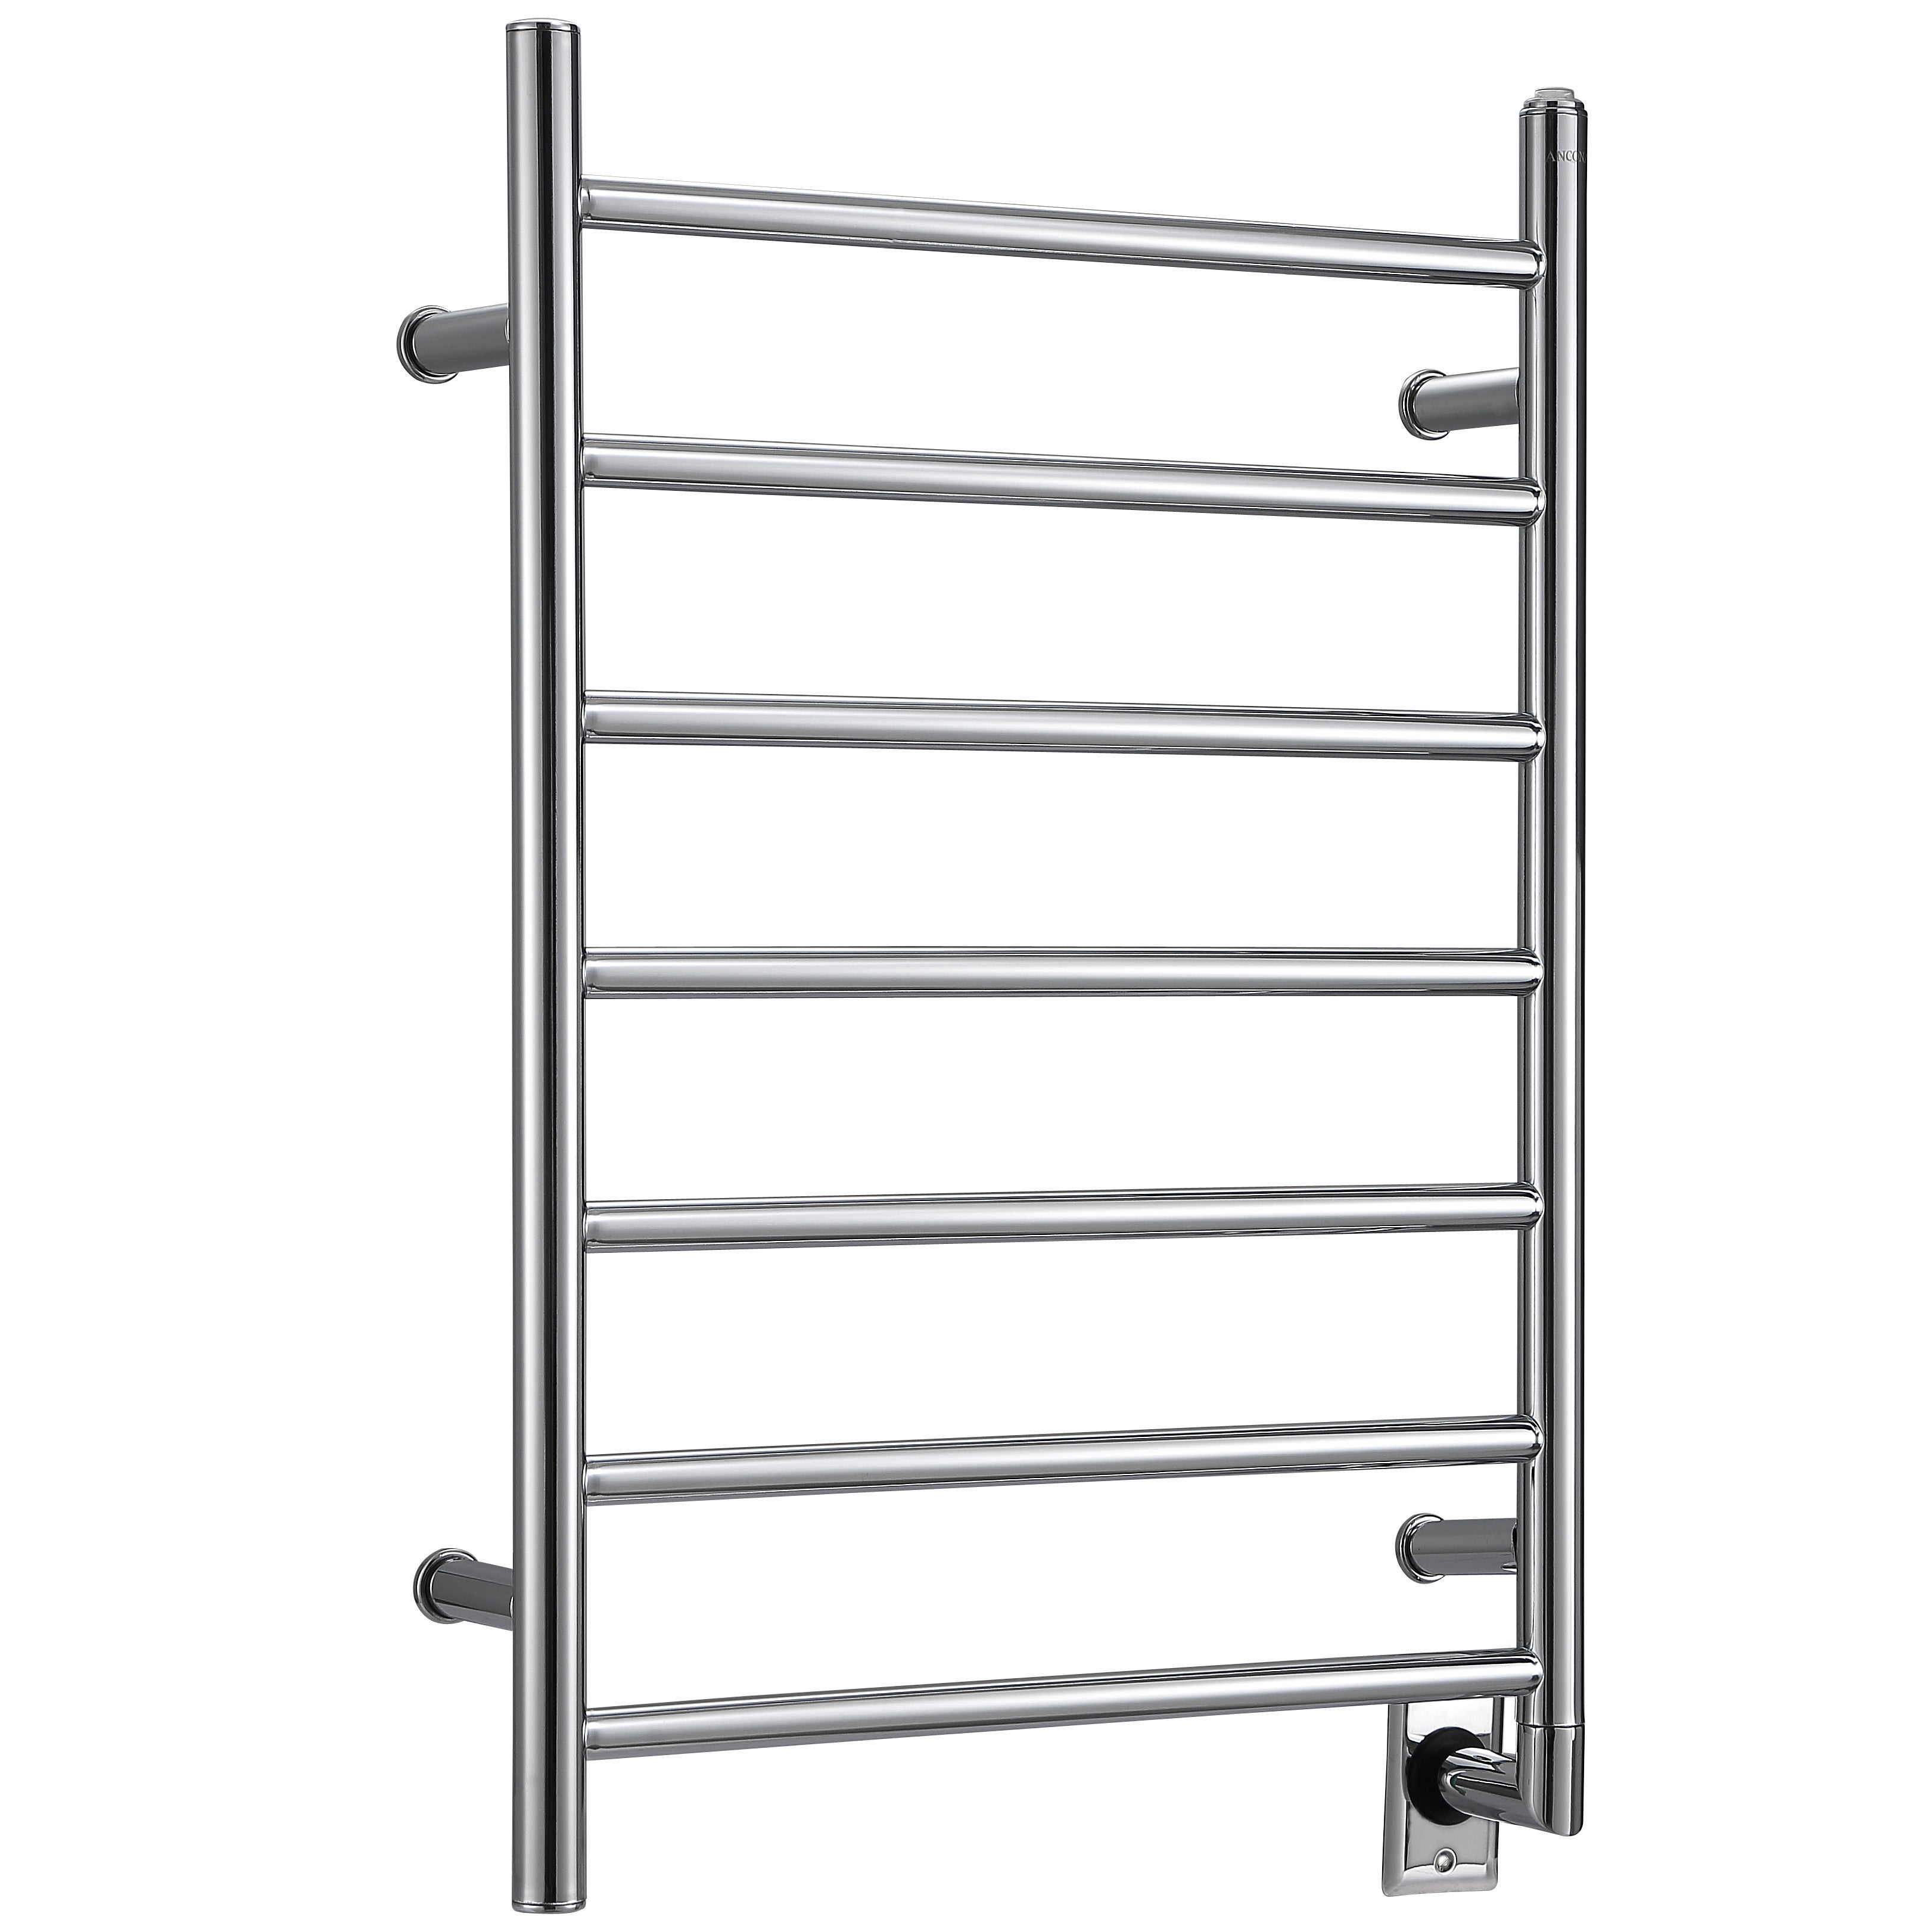 Comfort 7 - 31 in. Hardwired Electric Towel Warmer and Drying Rack in Chrome